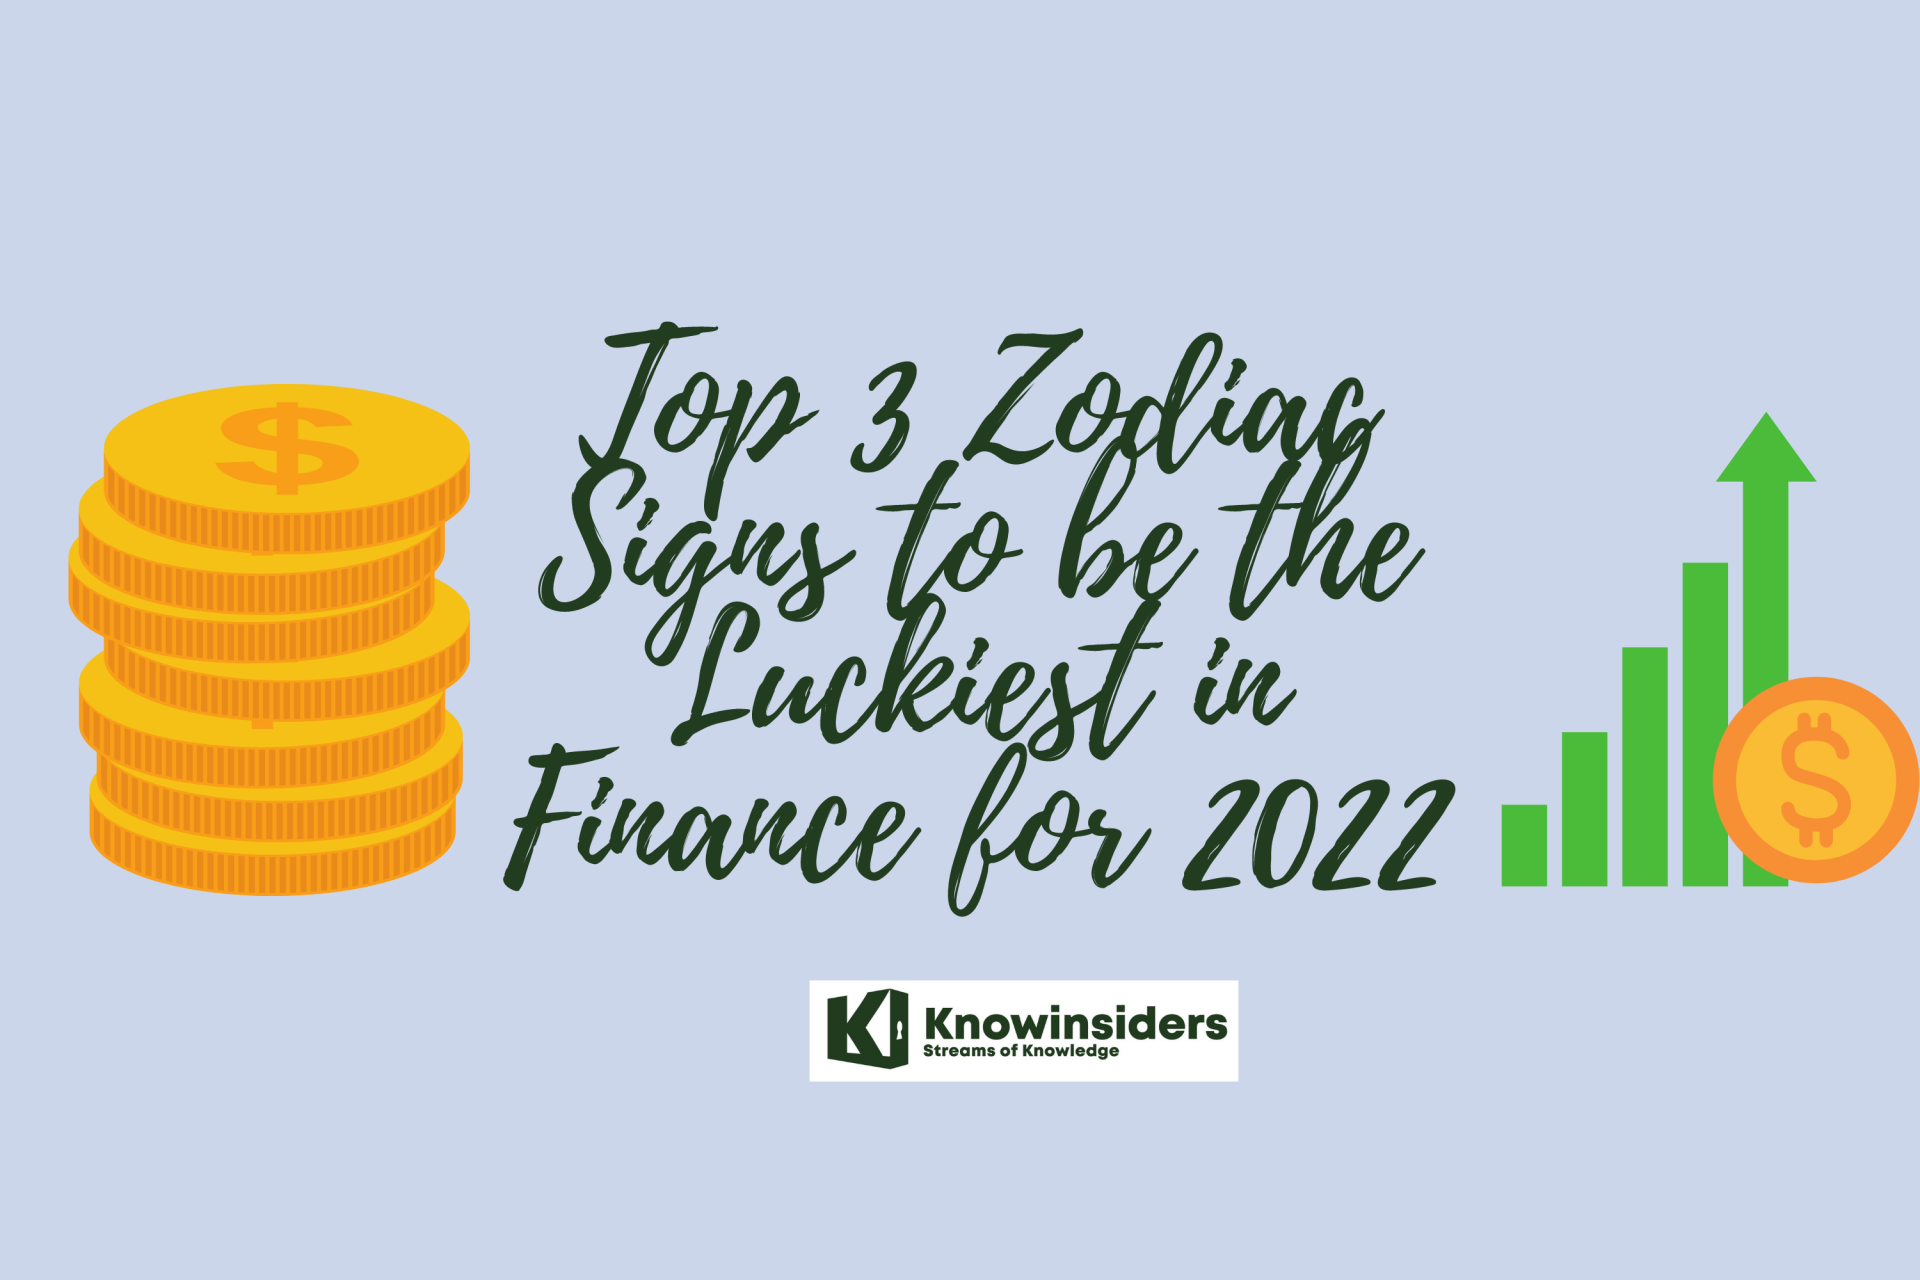 Top 3 Zodiac Signs to be the Luckiest in Finance for 2022